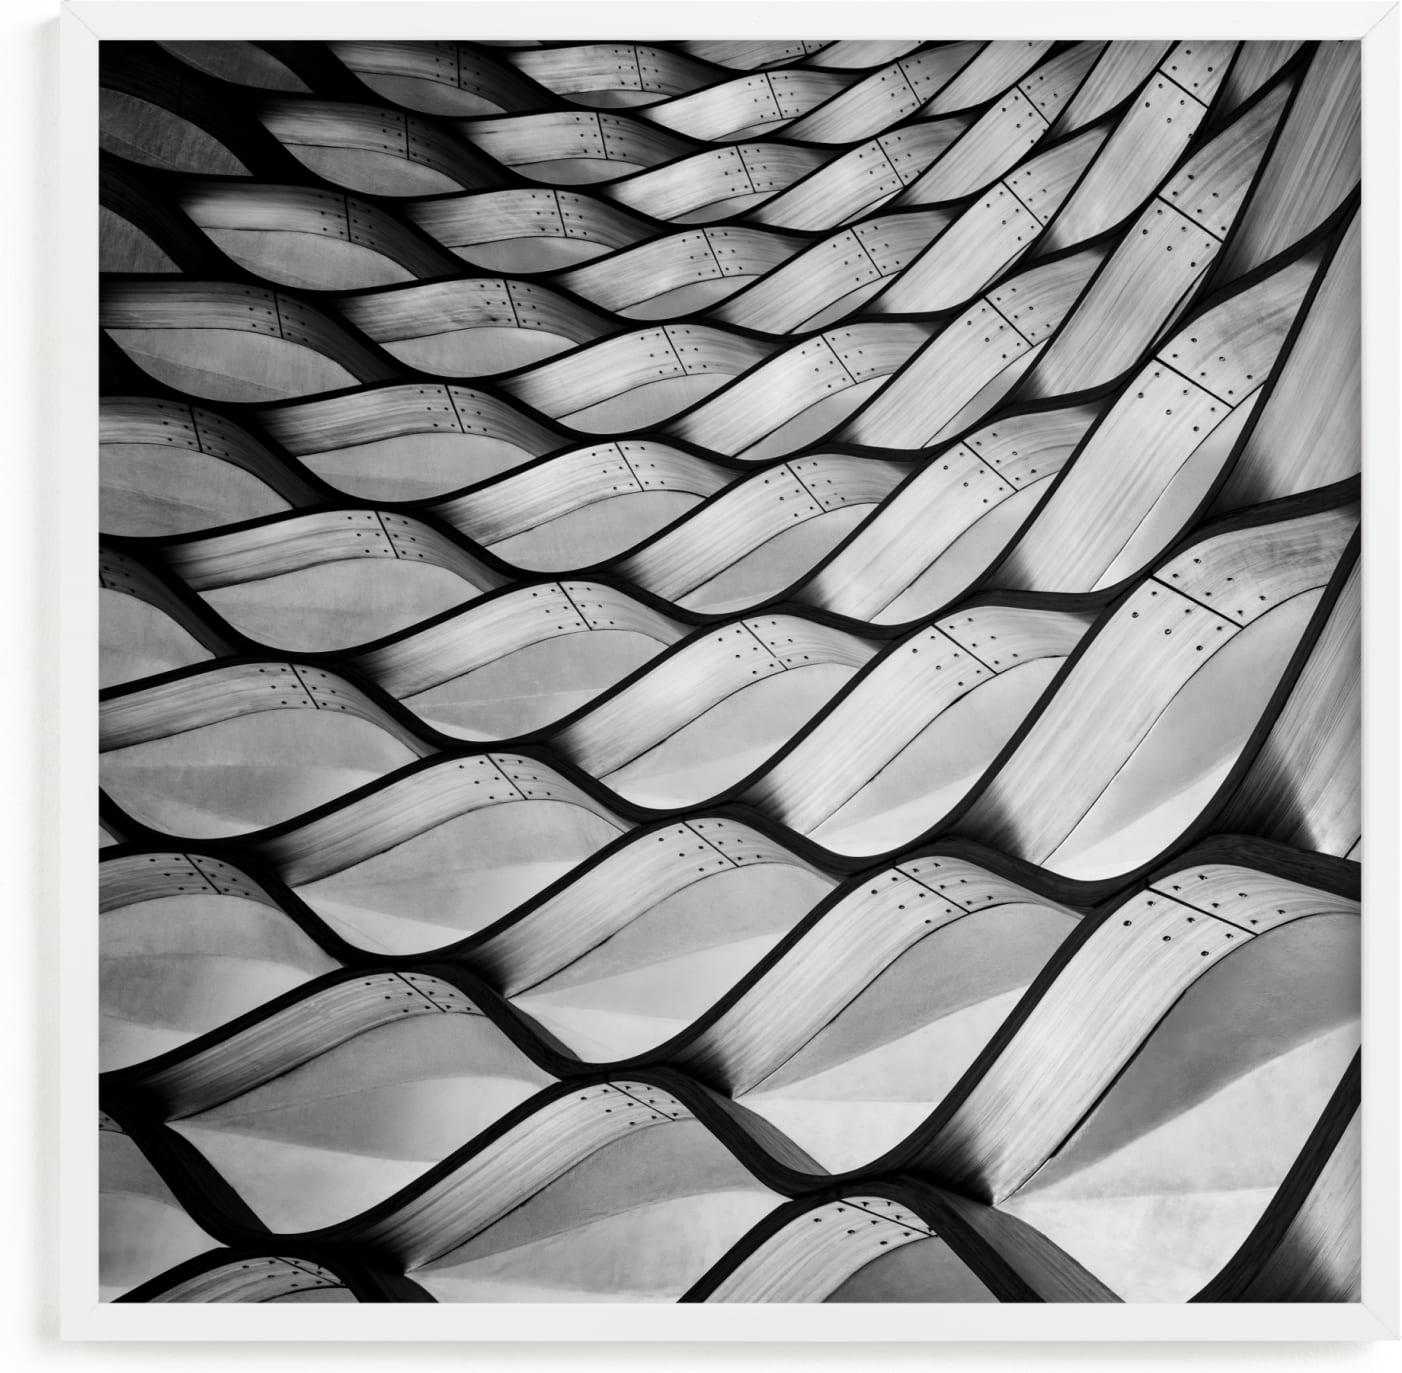 This is a black and white art by Angie McMonigal called Honeycomb.